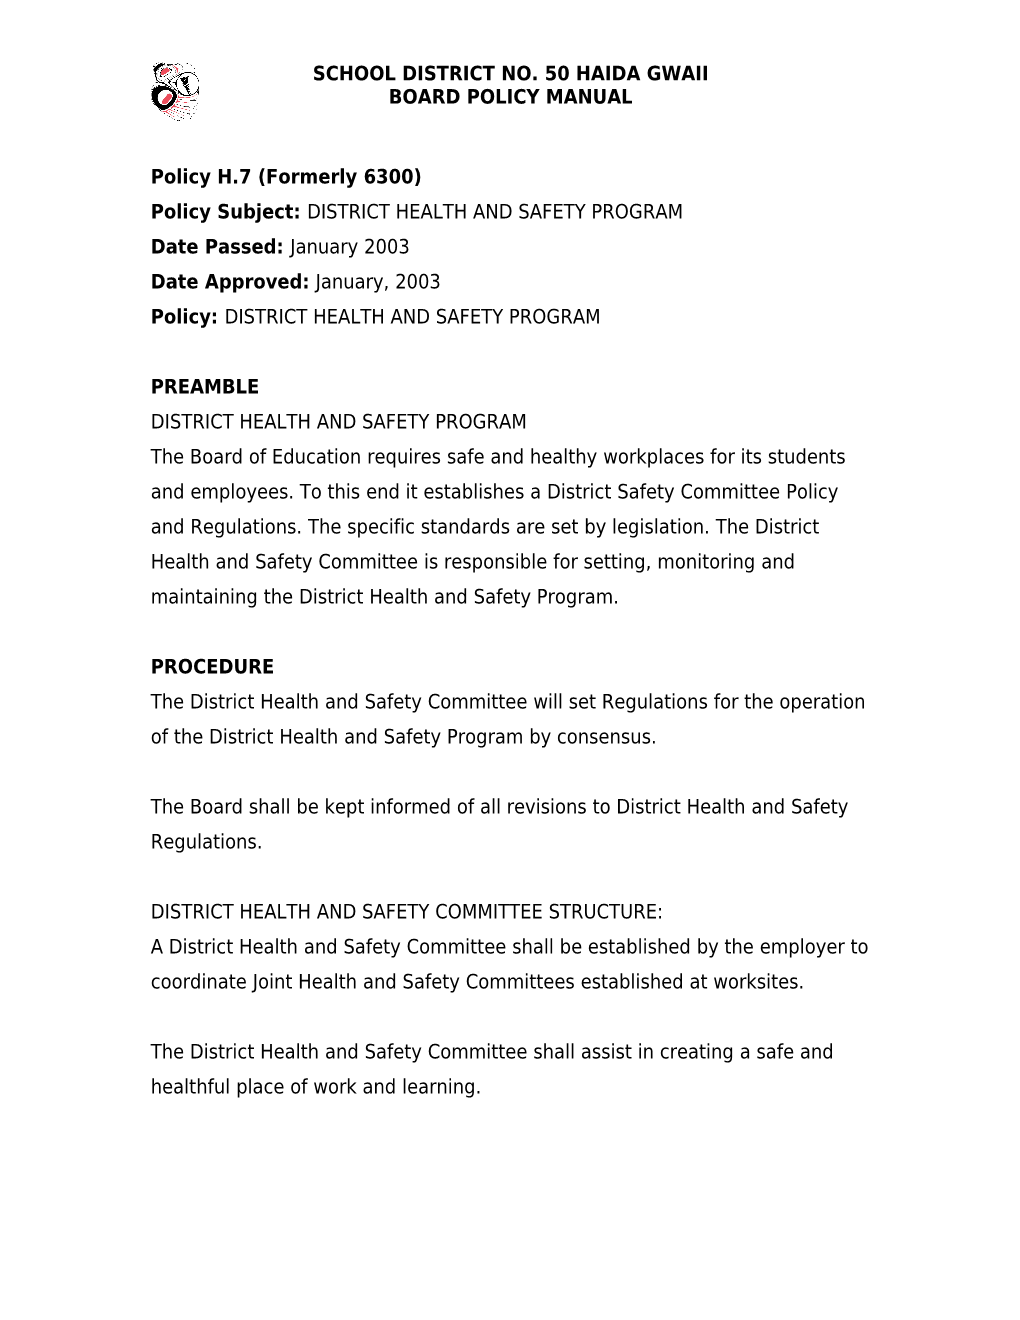 Policy Subject: DISTRICT HEALTH and SAFETY PROGRAM